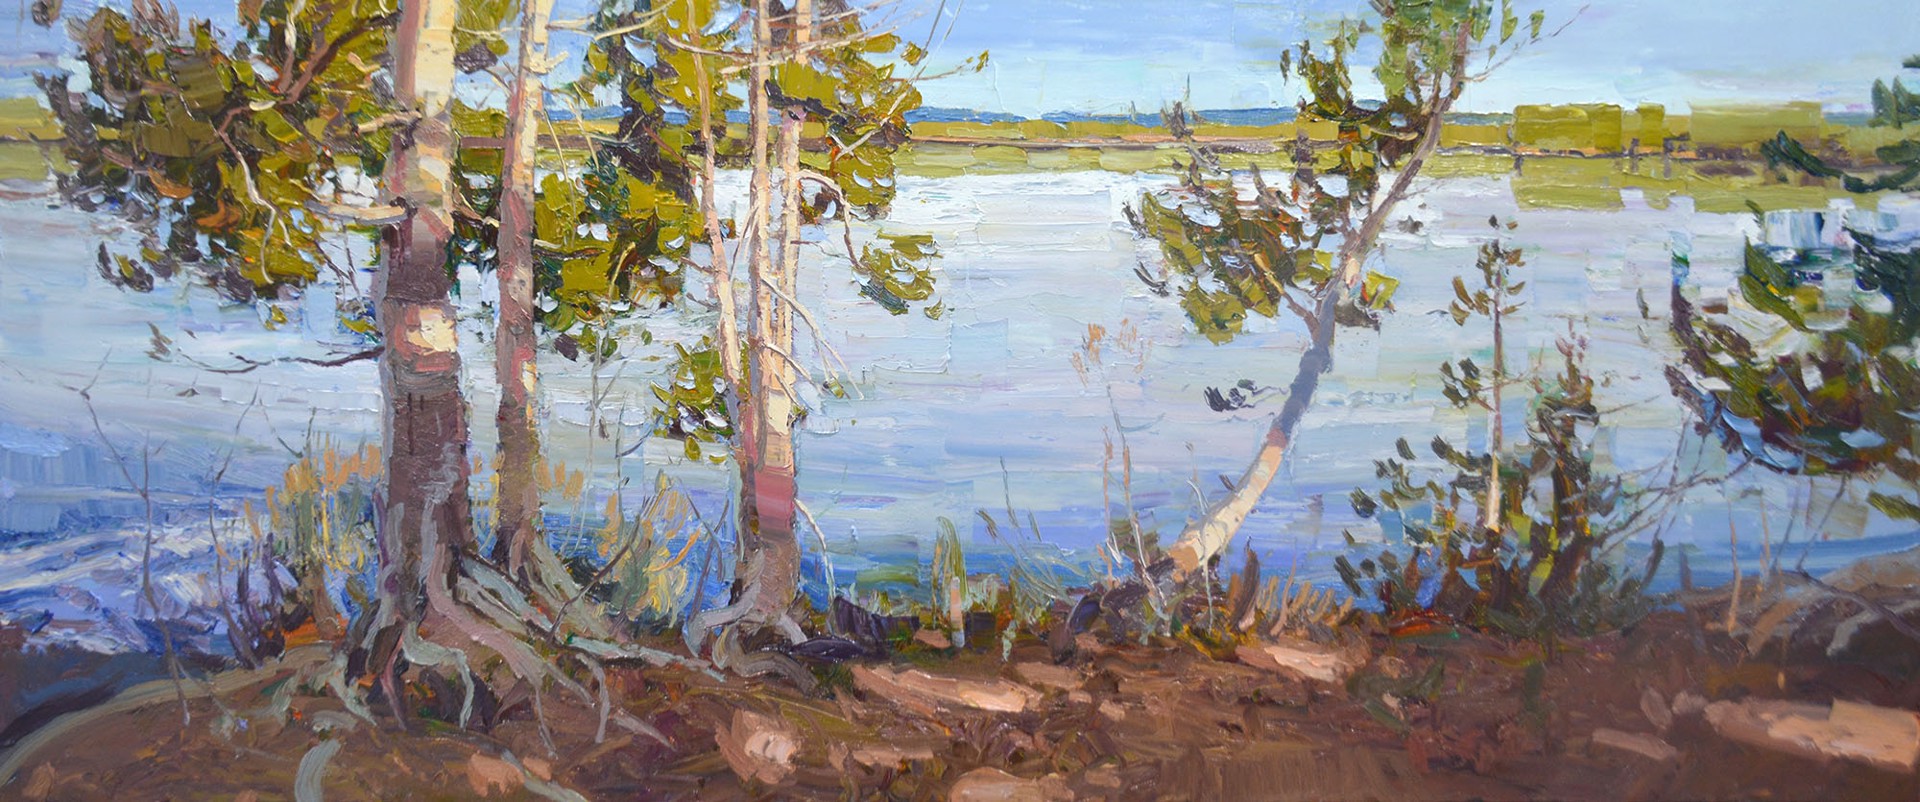 Original Contemporary Oil Painting Of Water With Trees On The Shore By Silas Thompson Available At Gallery Wild